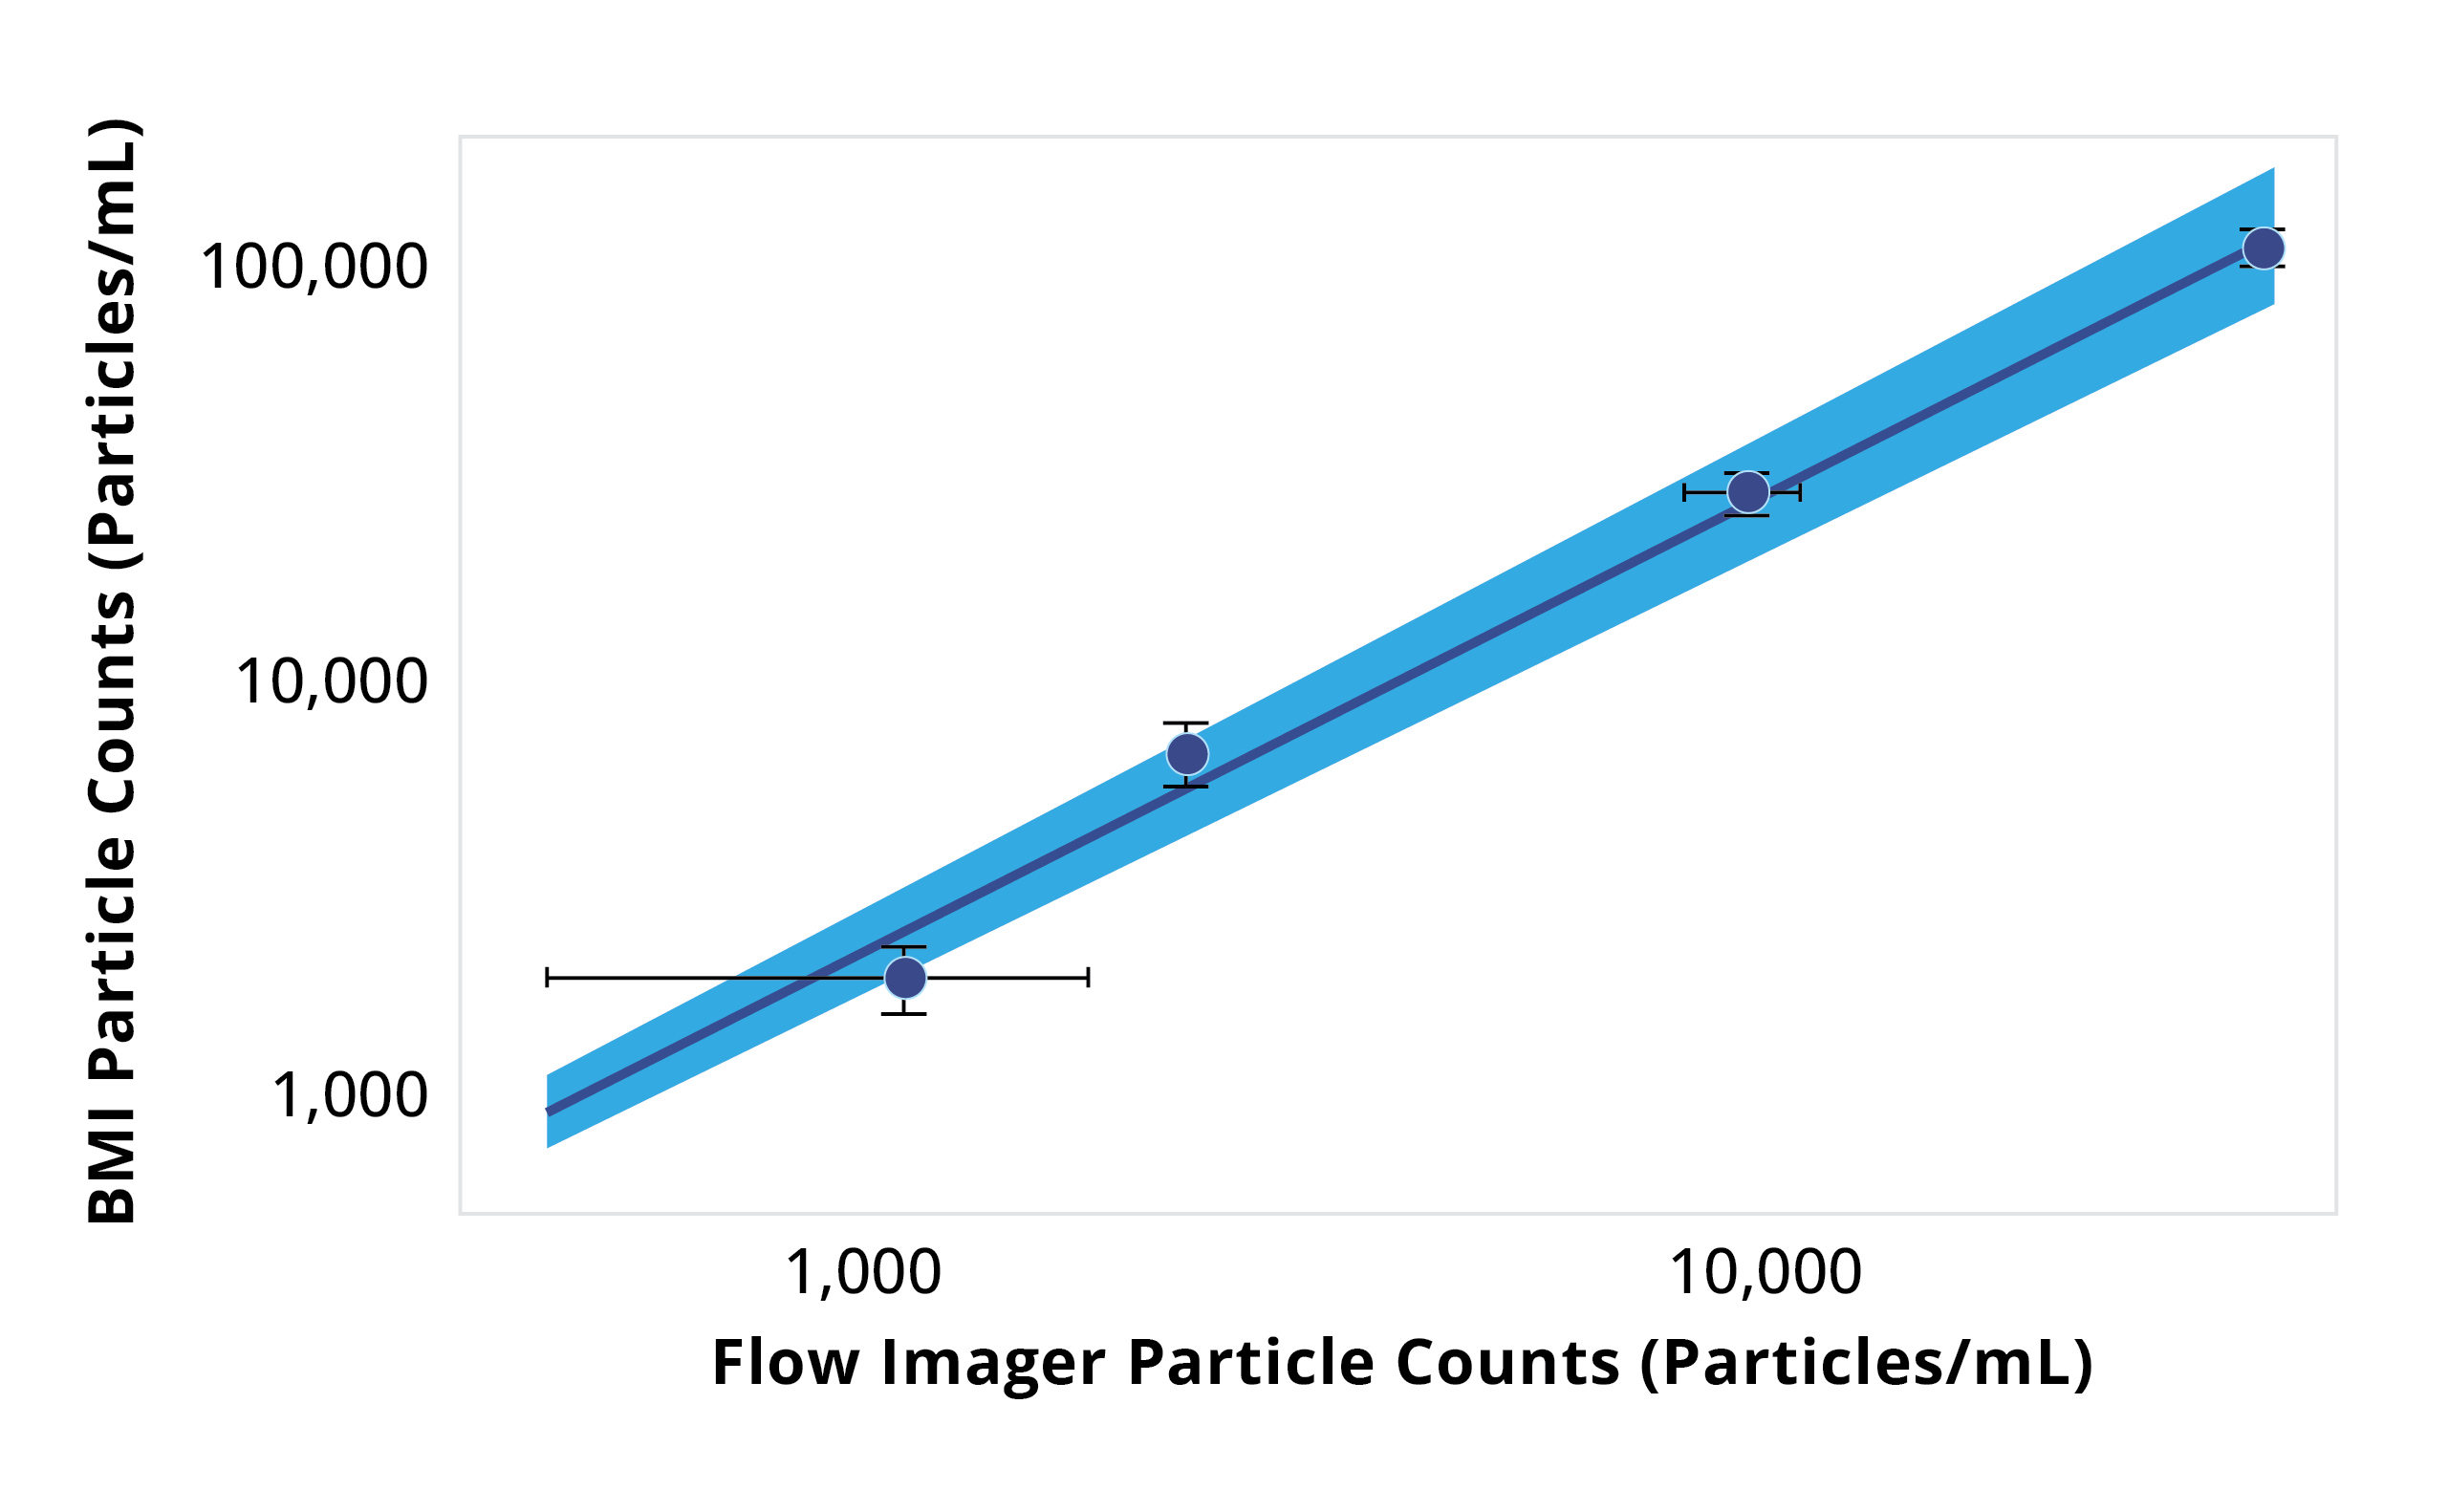 Aura consistently reveals more particles than flow imaging.